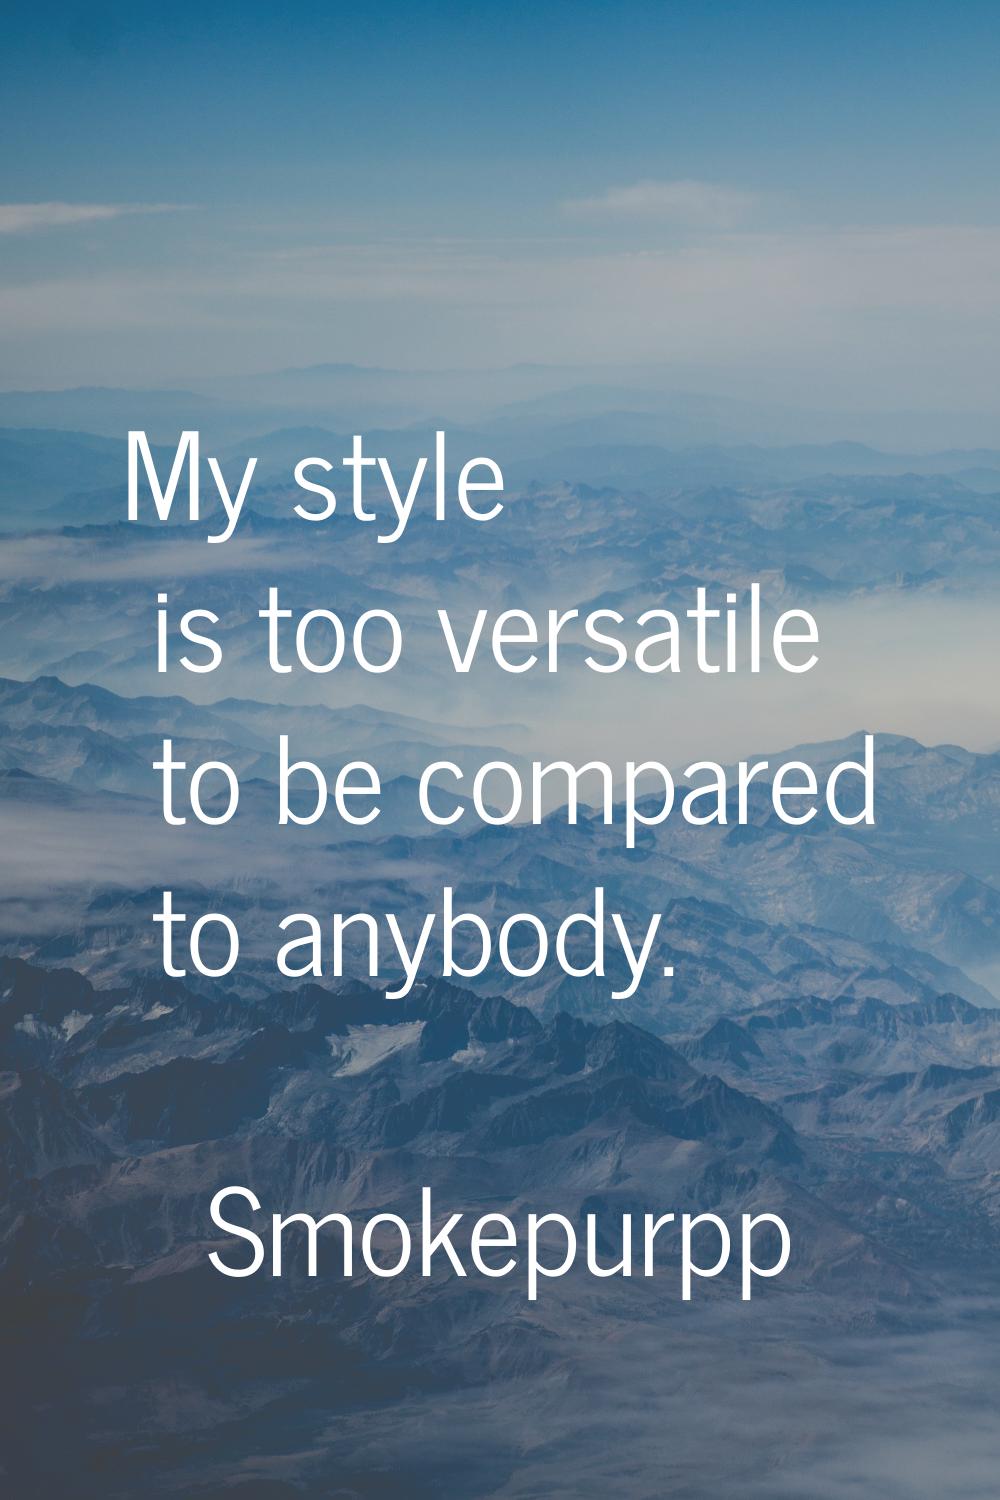 My style is too versatile to be compared to anybody.